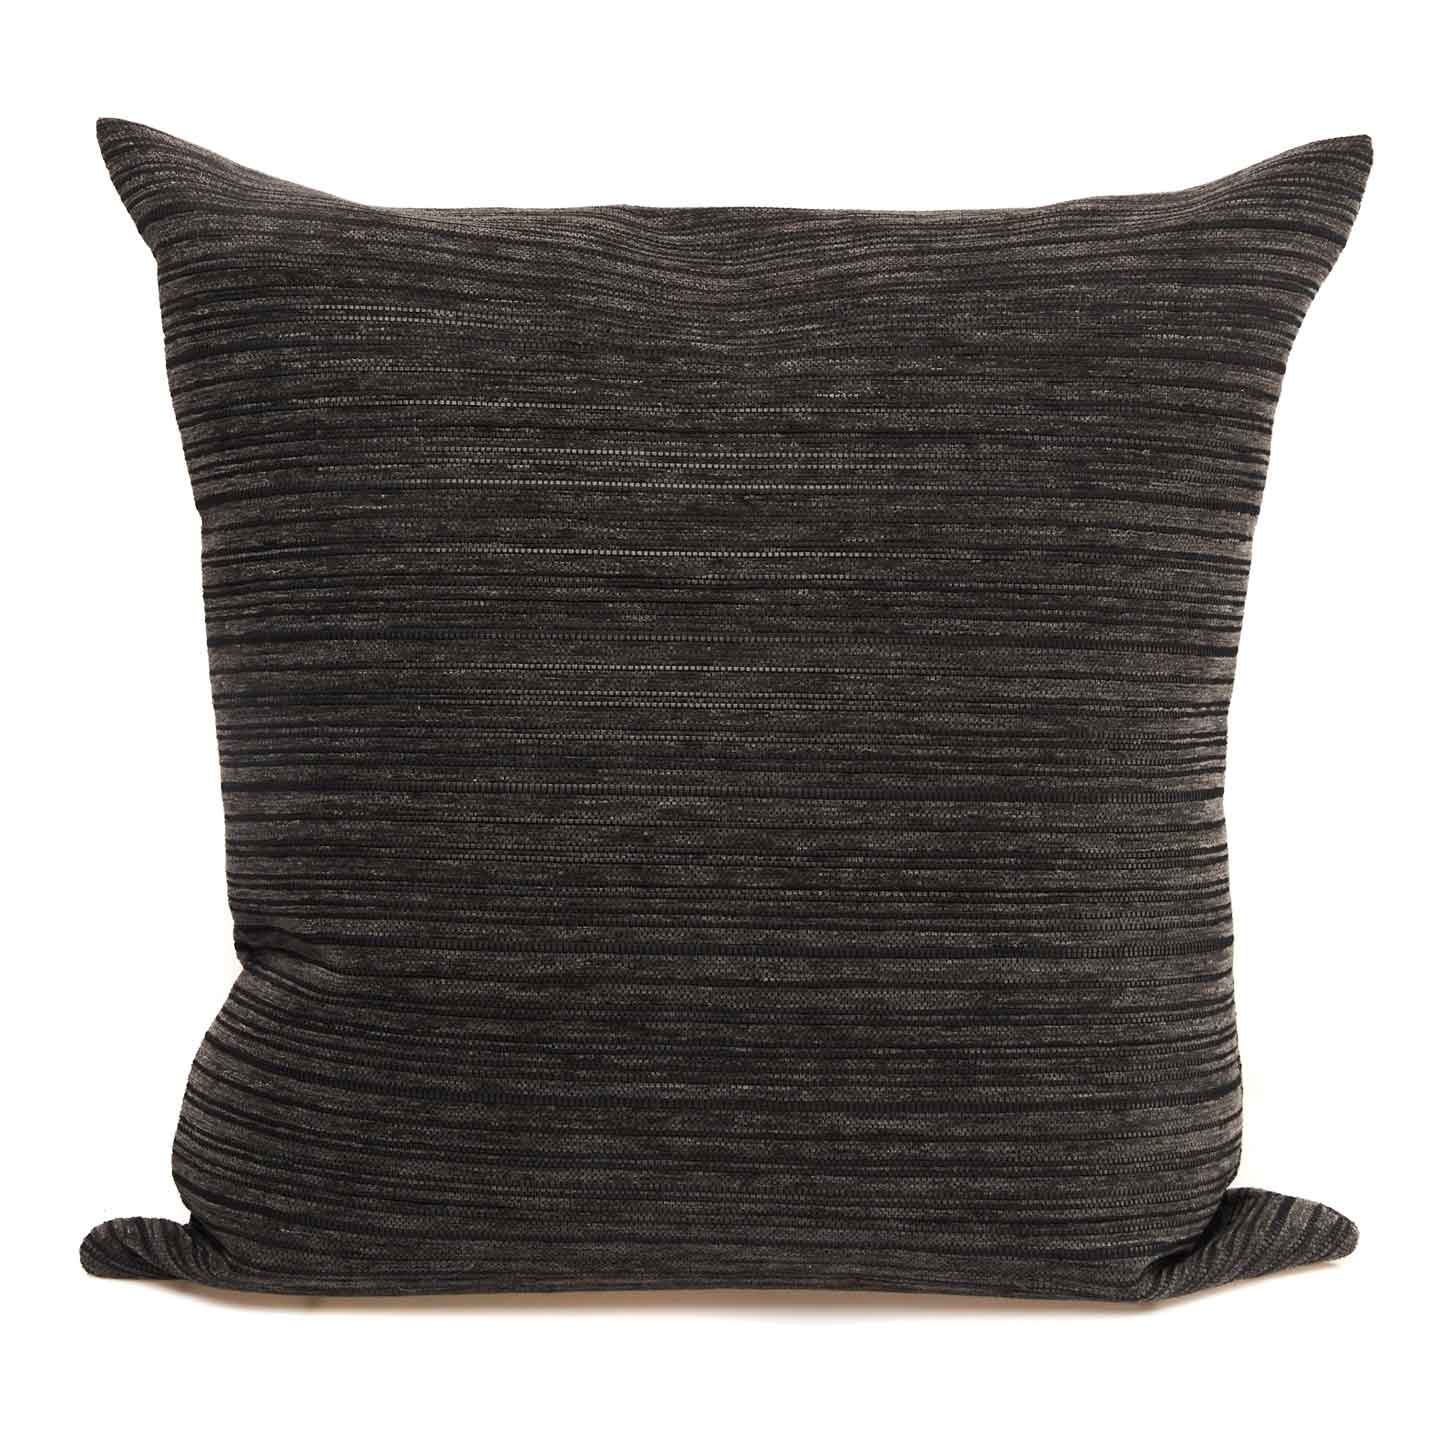 The Cindy pillow by Beau Home